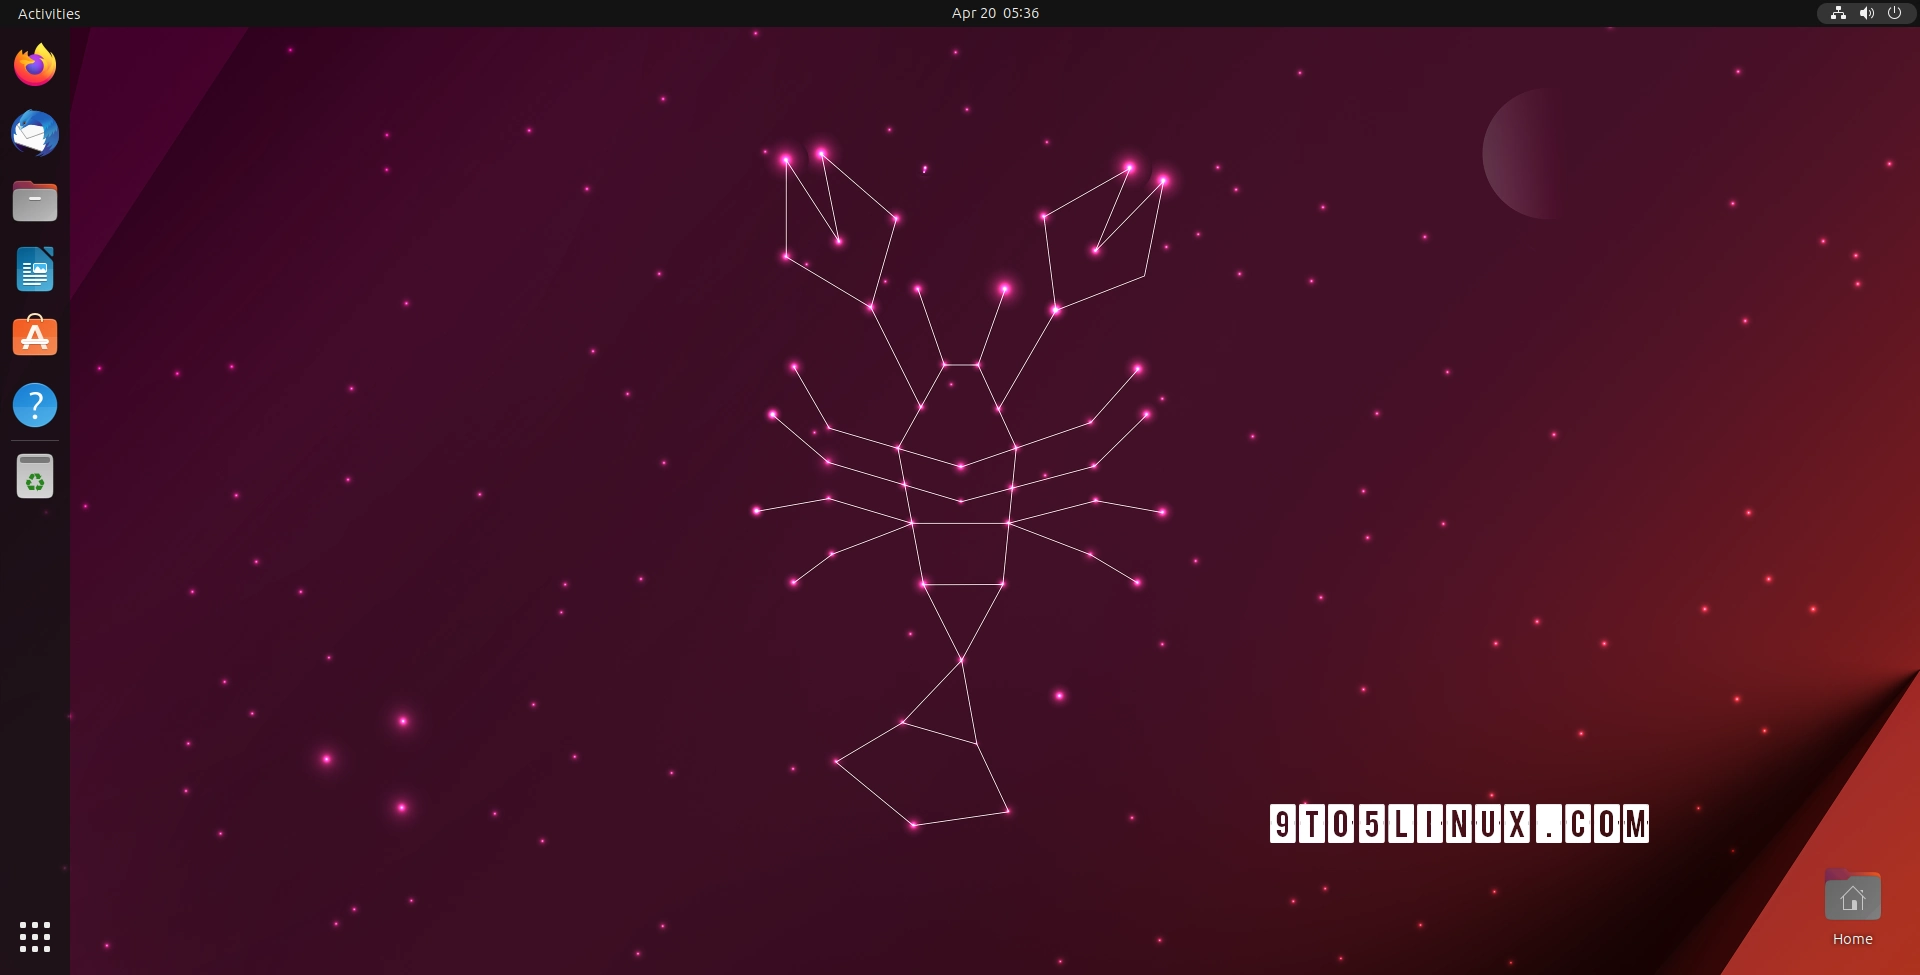 Ubuntu 23.04 “Lunar Lobster” Is Now Available for Download, This Is What’s New